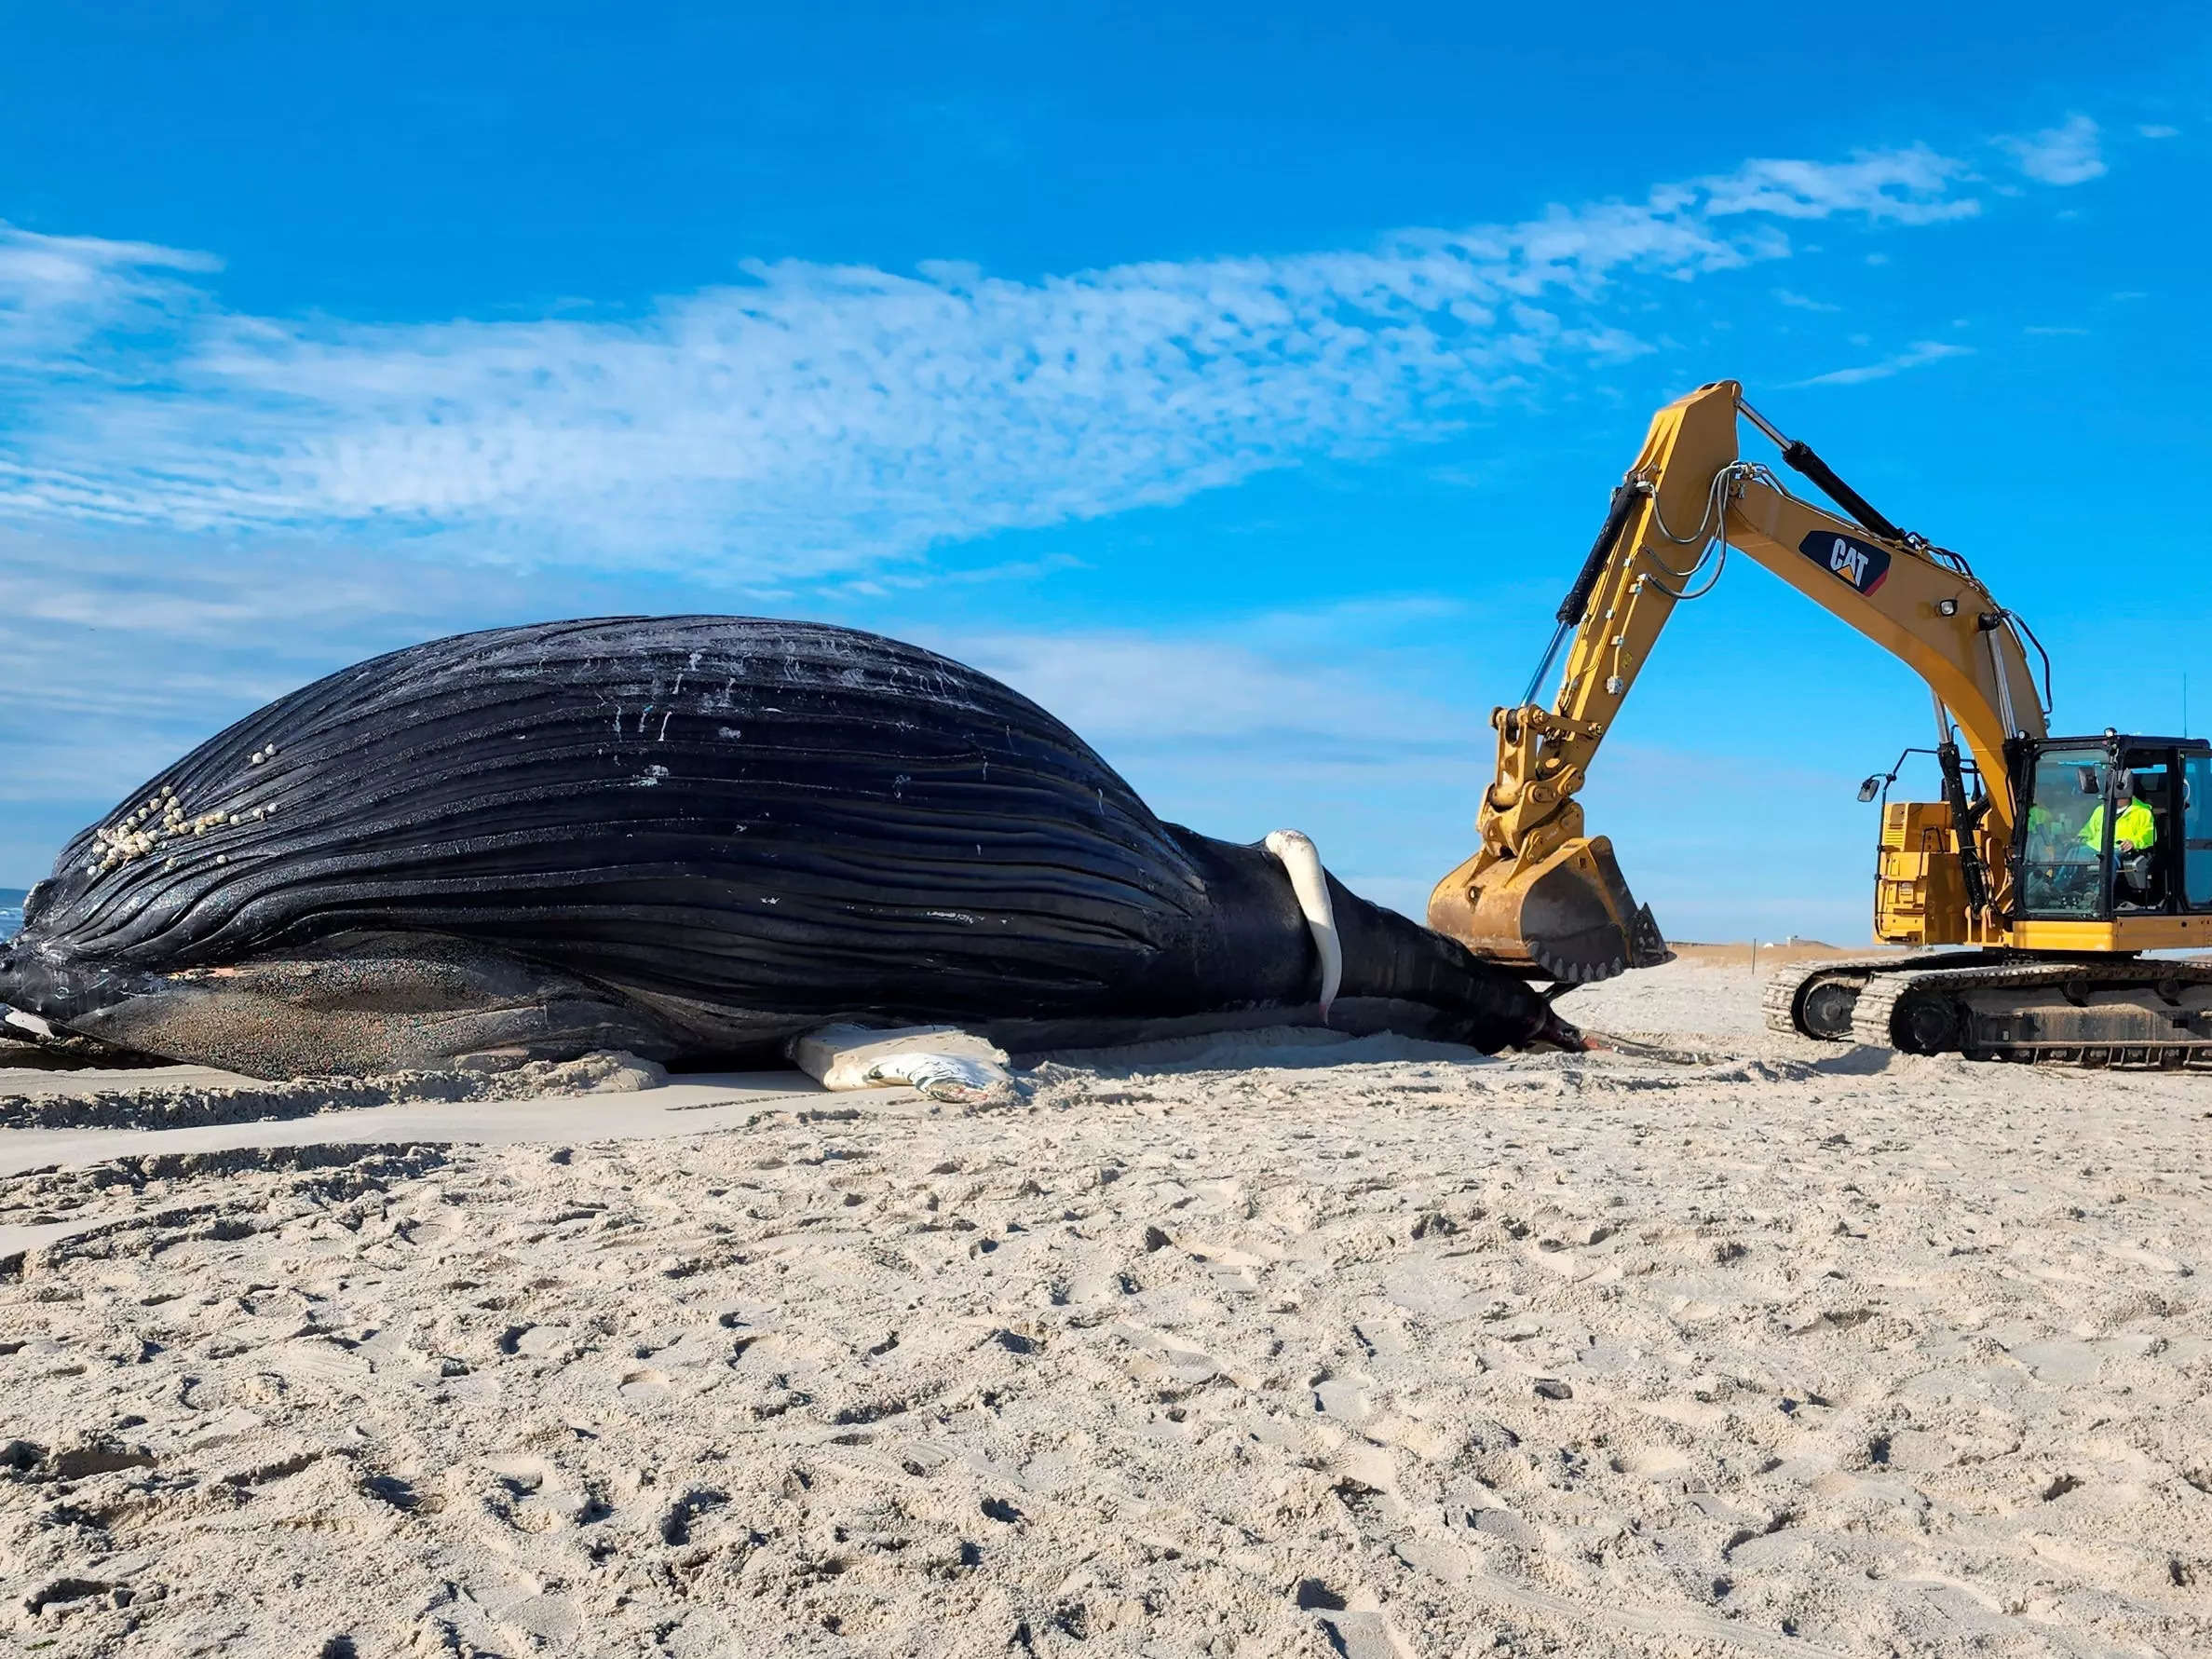 Why do whales beach themselves? We're partially to blame.